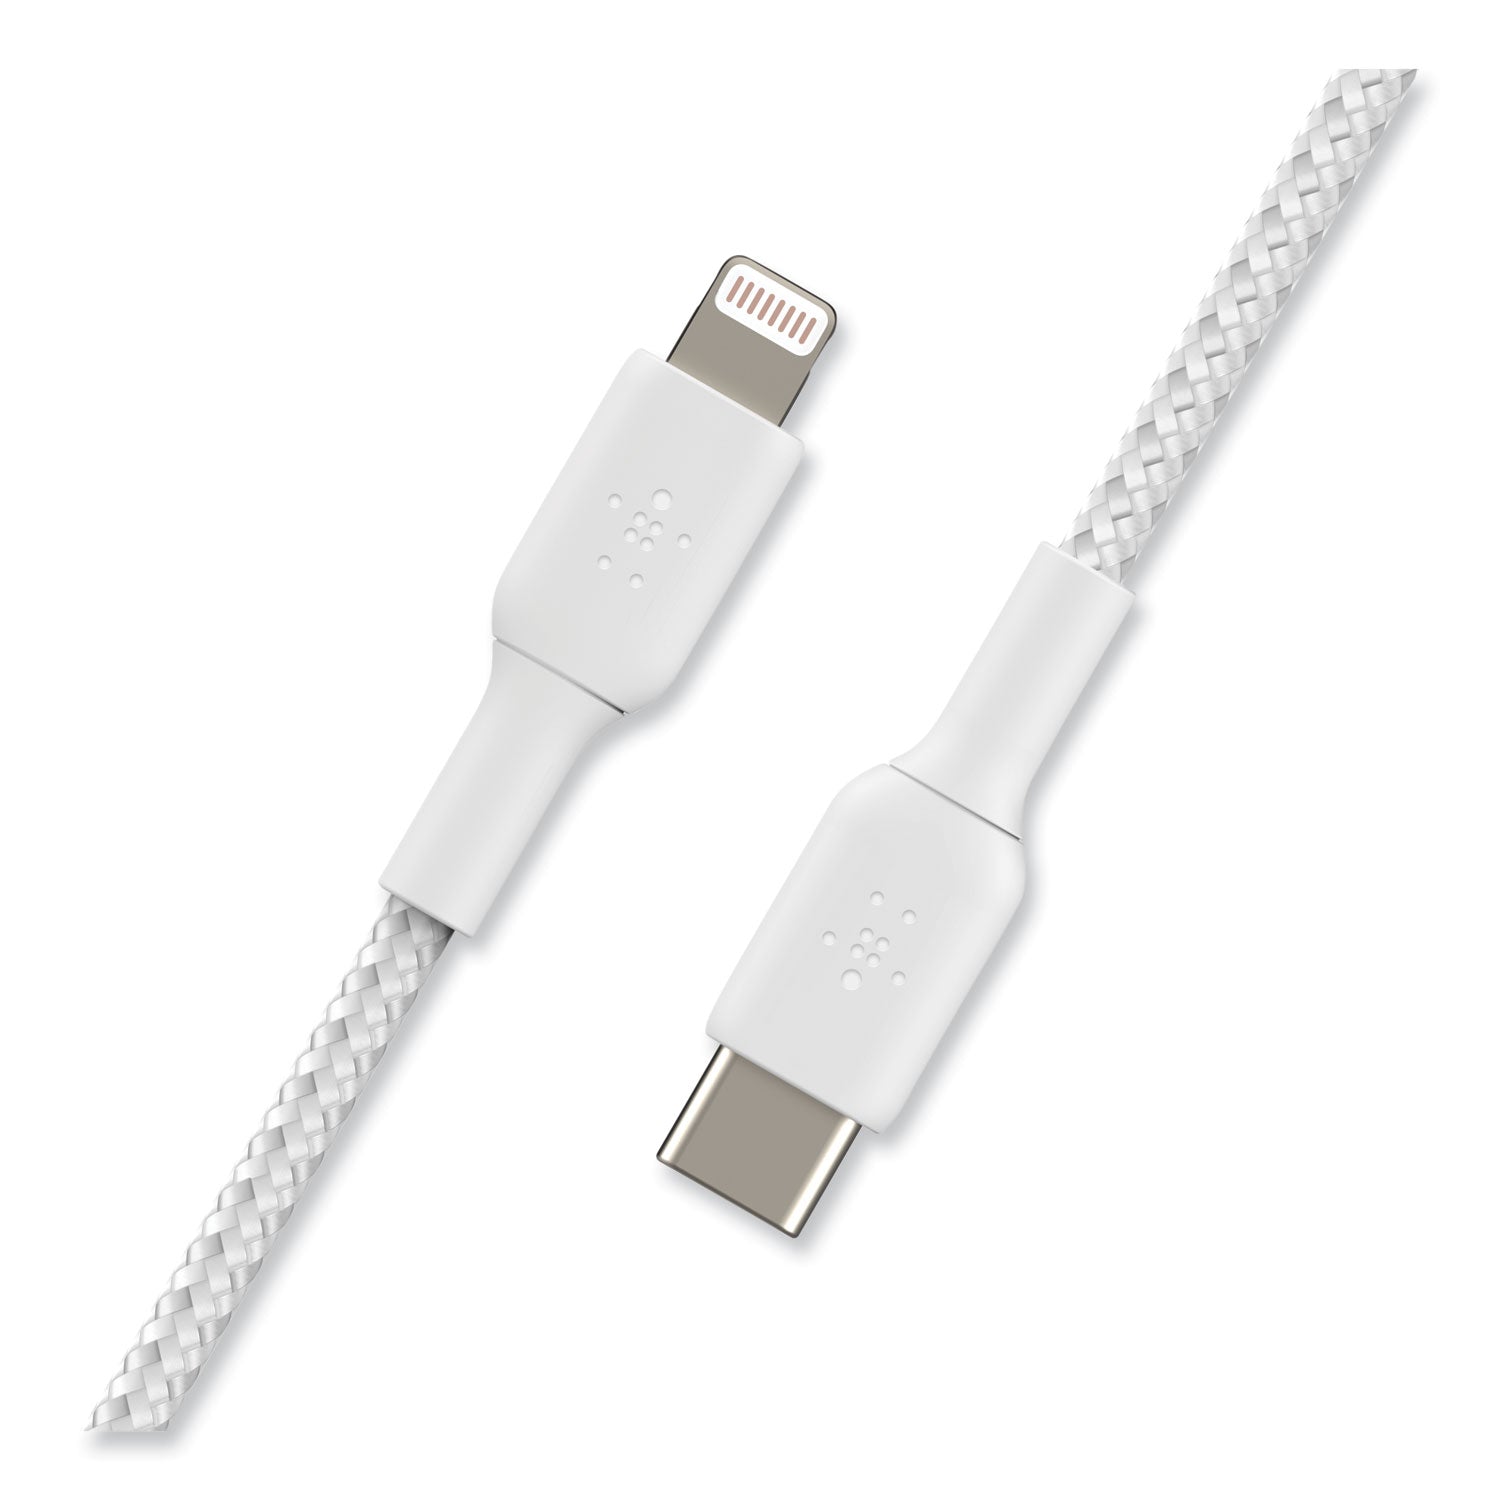 boost-charge-braided-apple-lightning-to-usb-c-chargesync-cable-33-ft-white_blkcaa004bt1mwh - 3